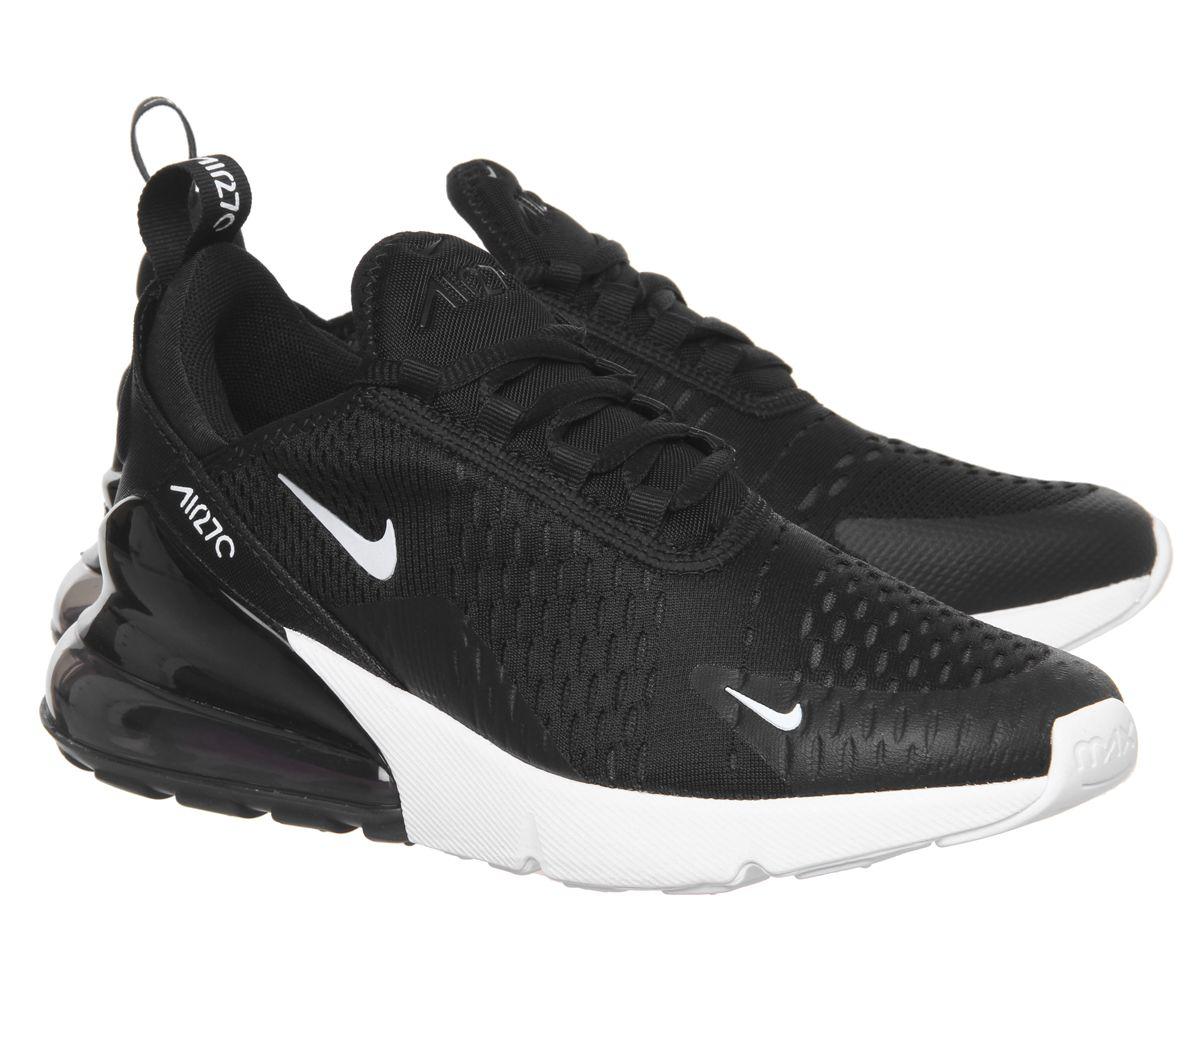 Nike Rubber Air Max 270 Gs Trainers in 